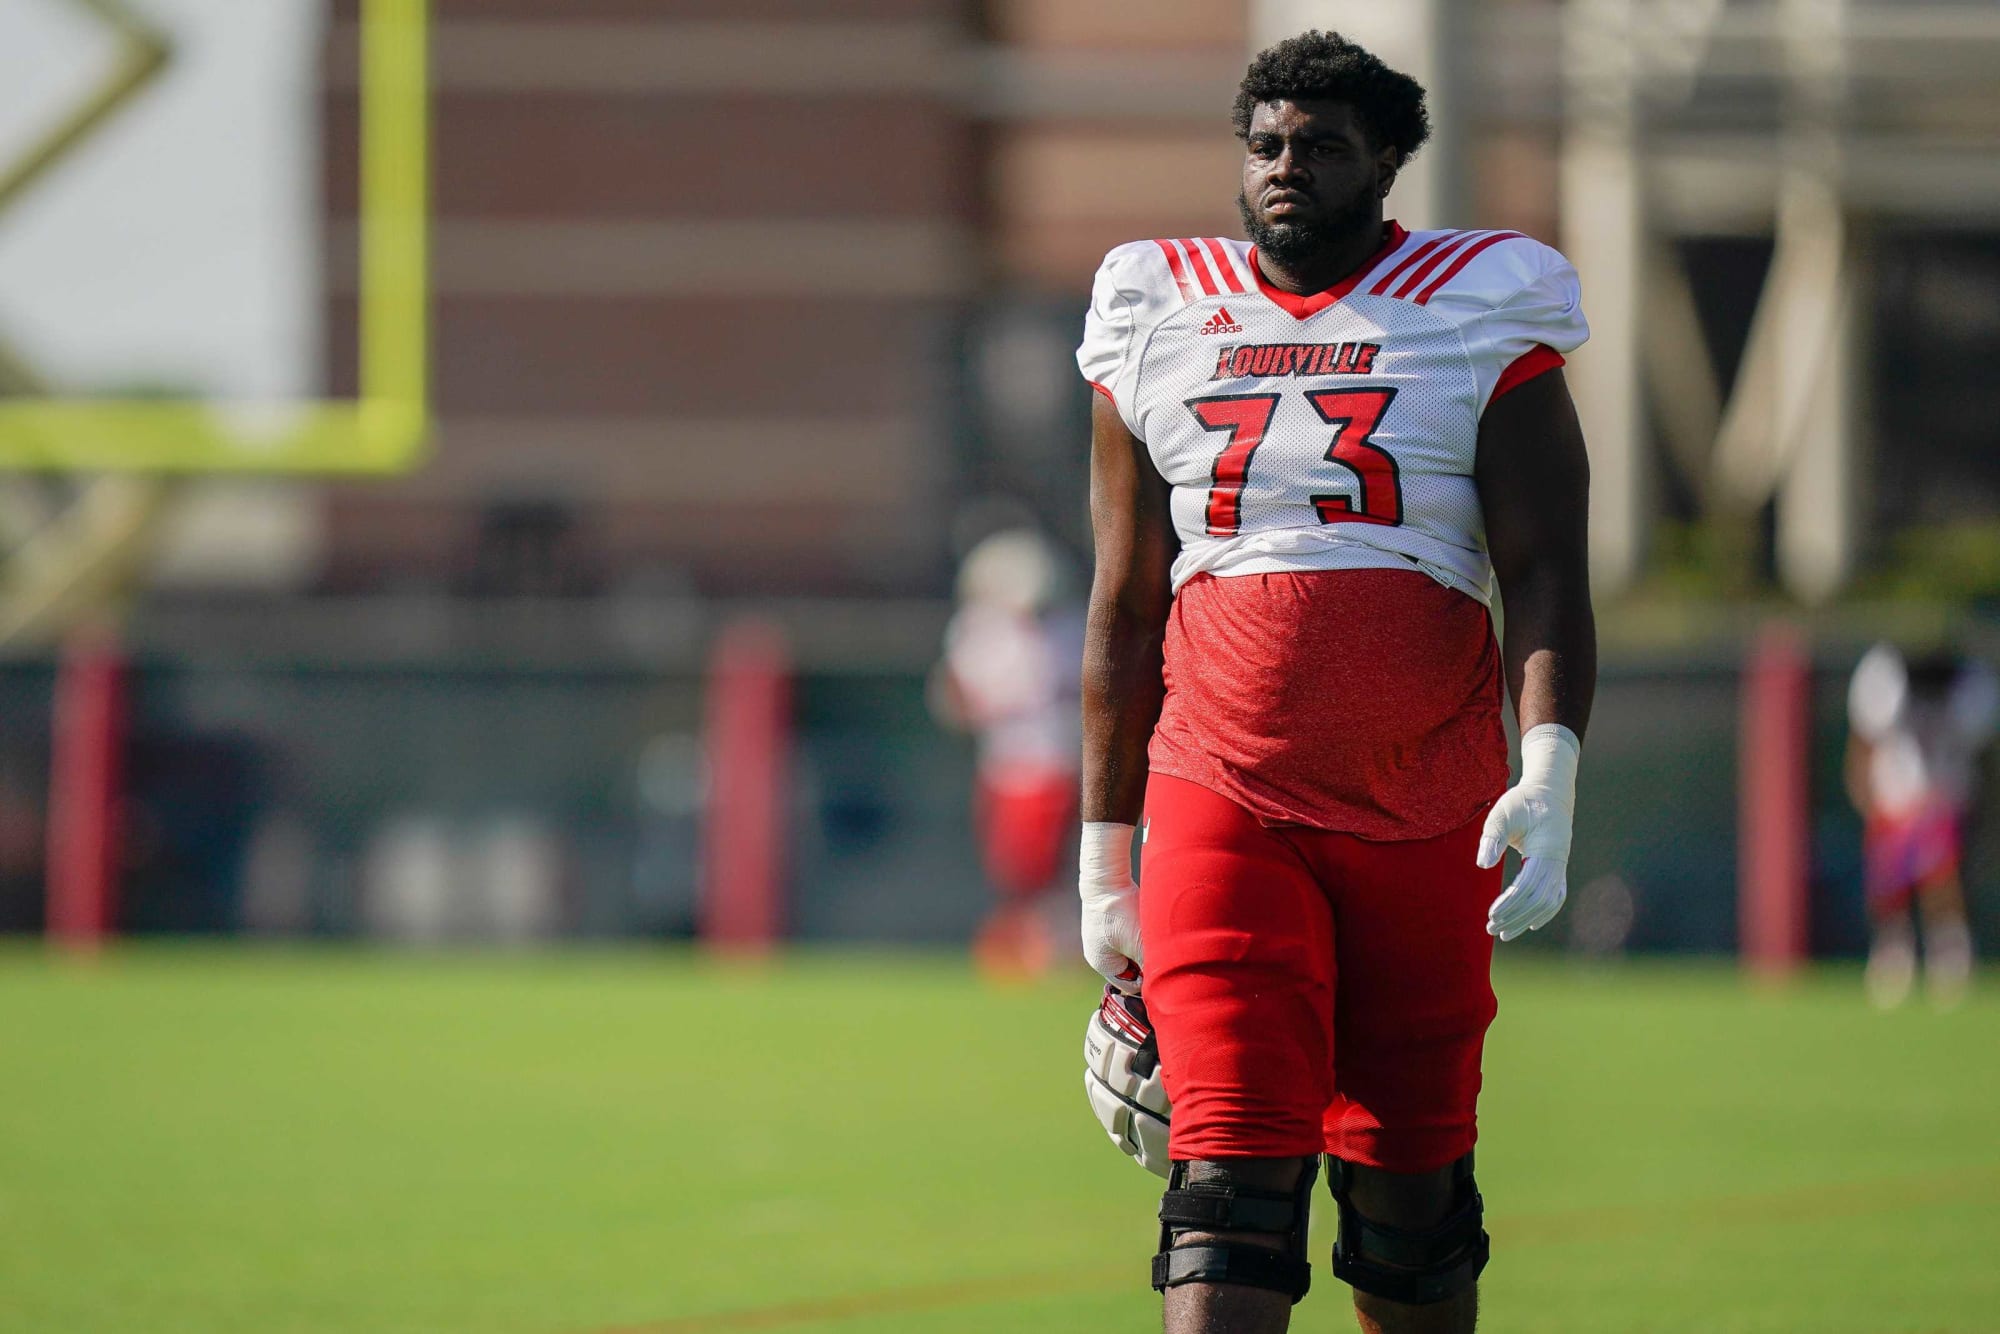 louisville-football-cards-don-t-take-long-to-identify-new-offensive-tackle